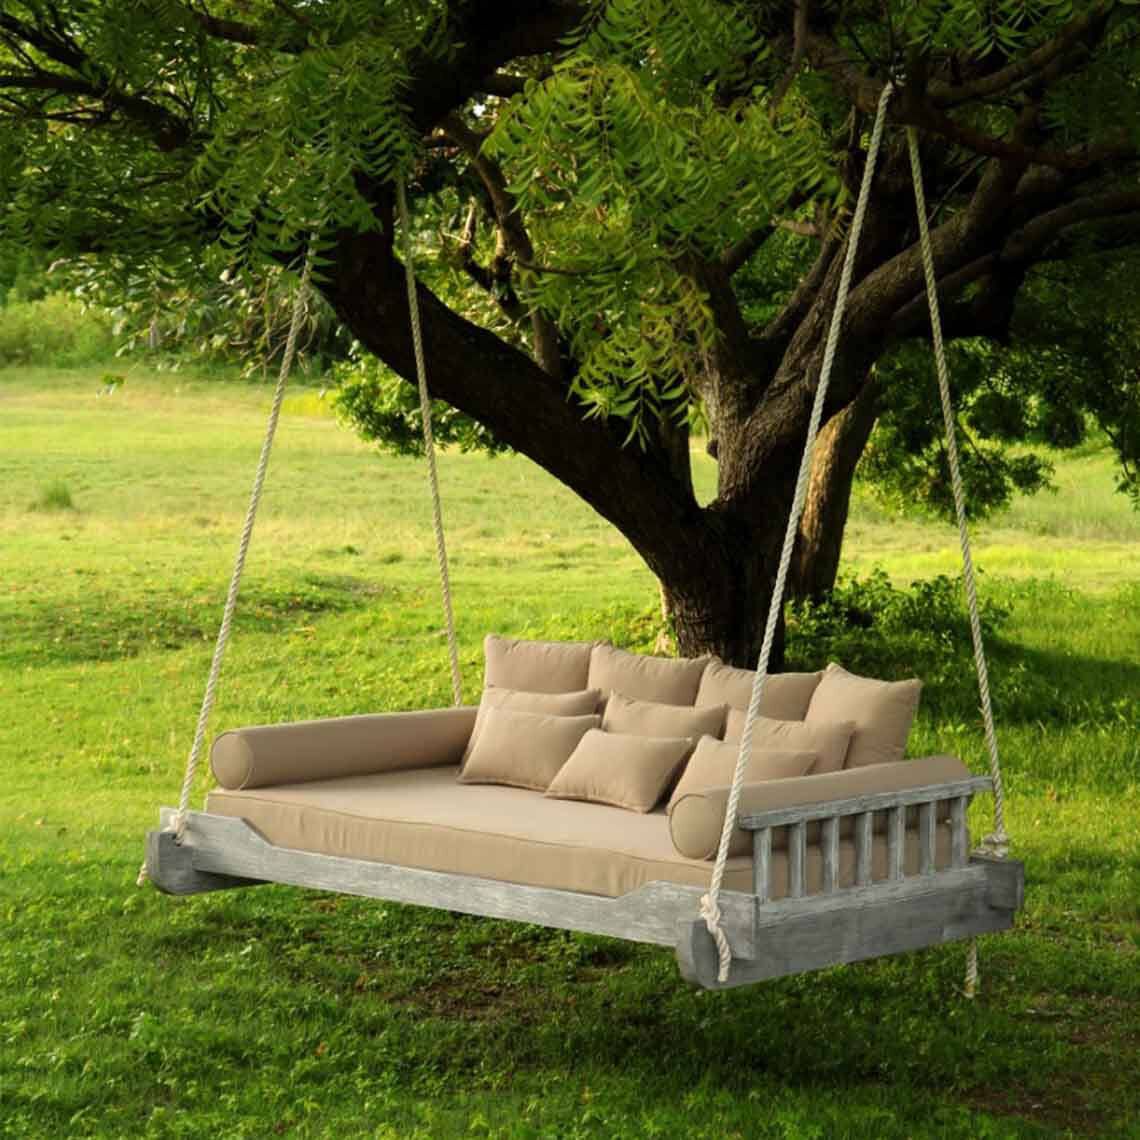 Scratch and Dent - Montana Rope Porch Swing Bed with Cushions and Pillows | Grade A Teak | Queen-Sized - FINAL SALE - view 2